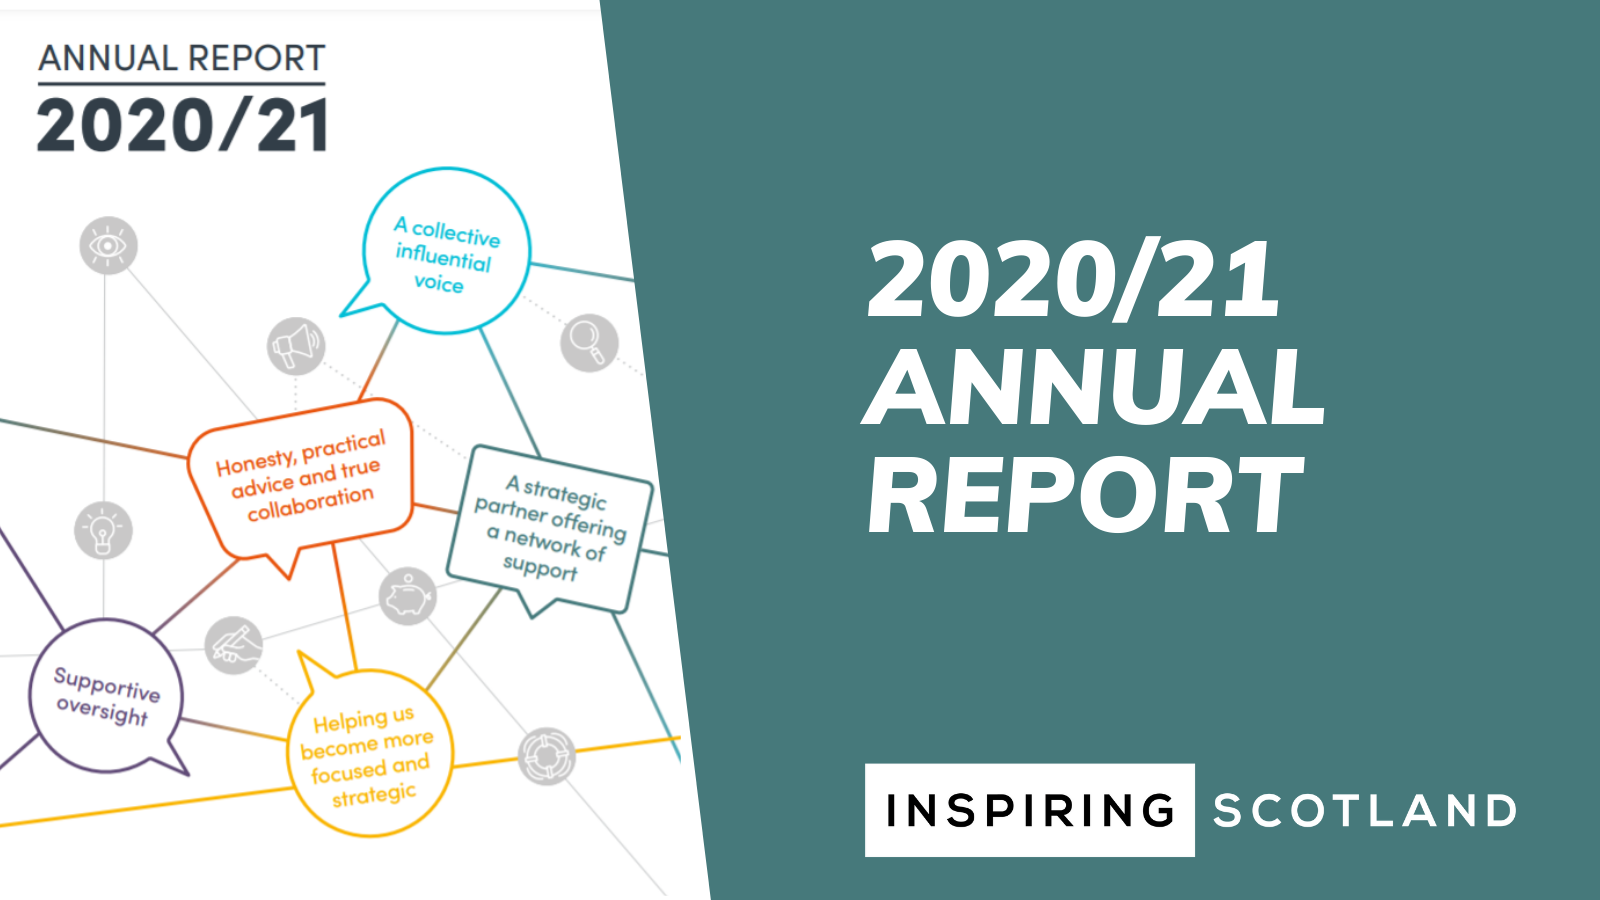 Highlights from our work in 2020/21